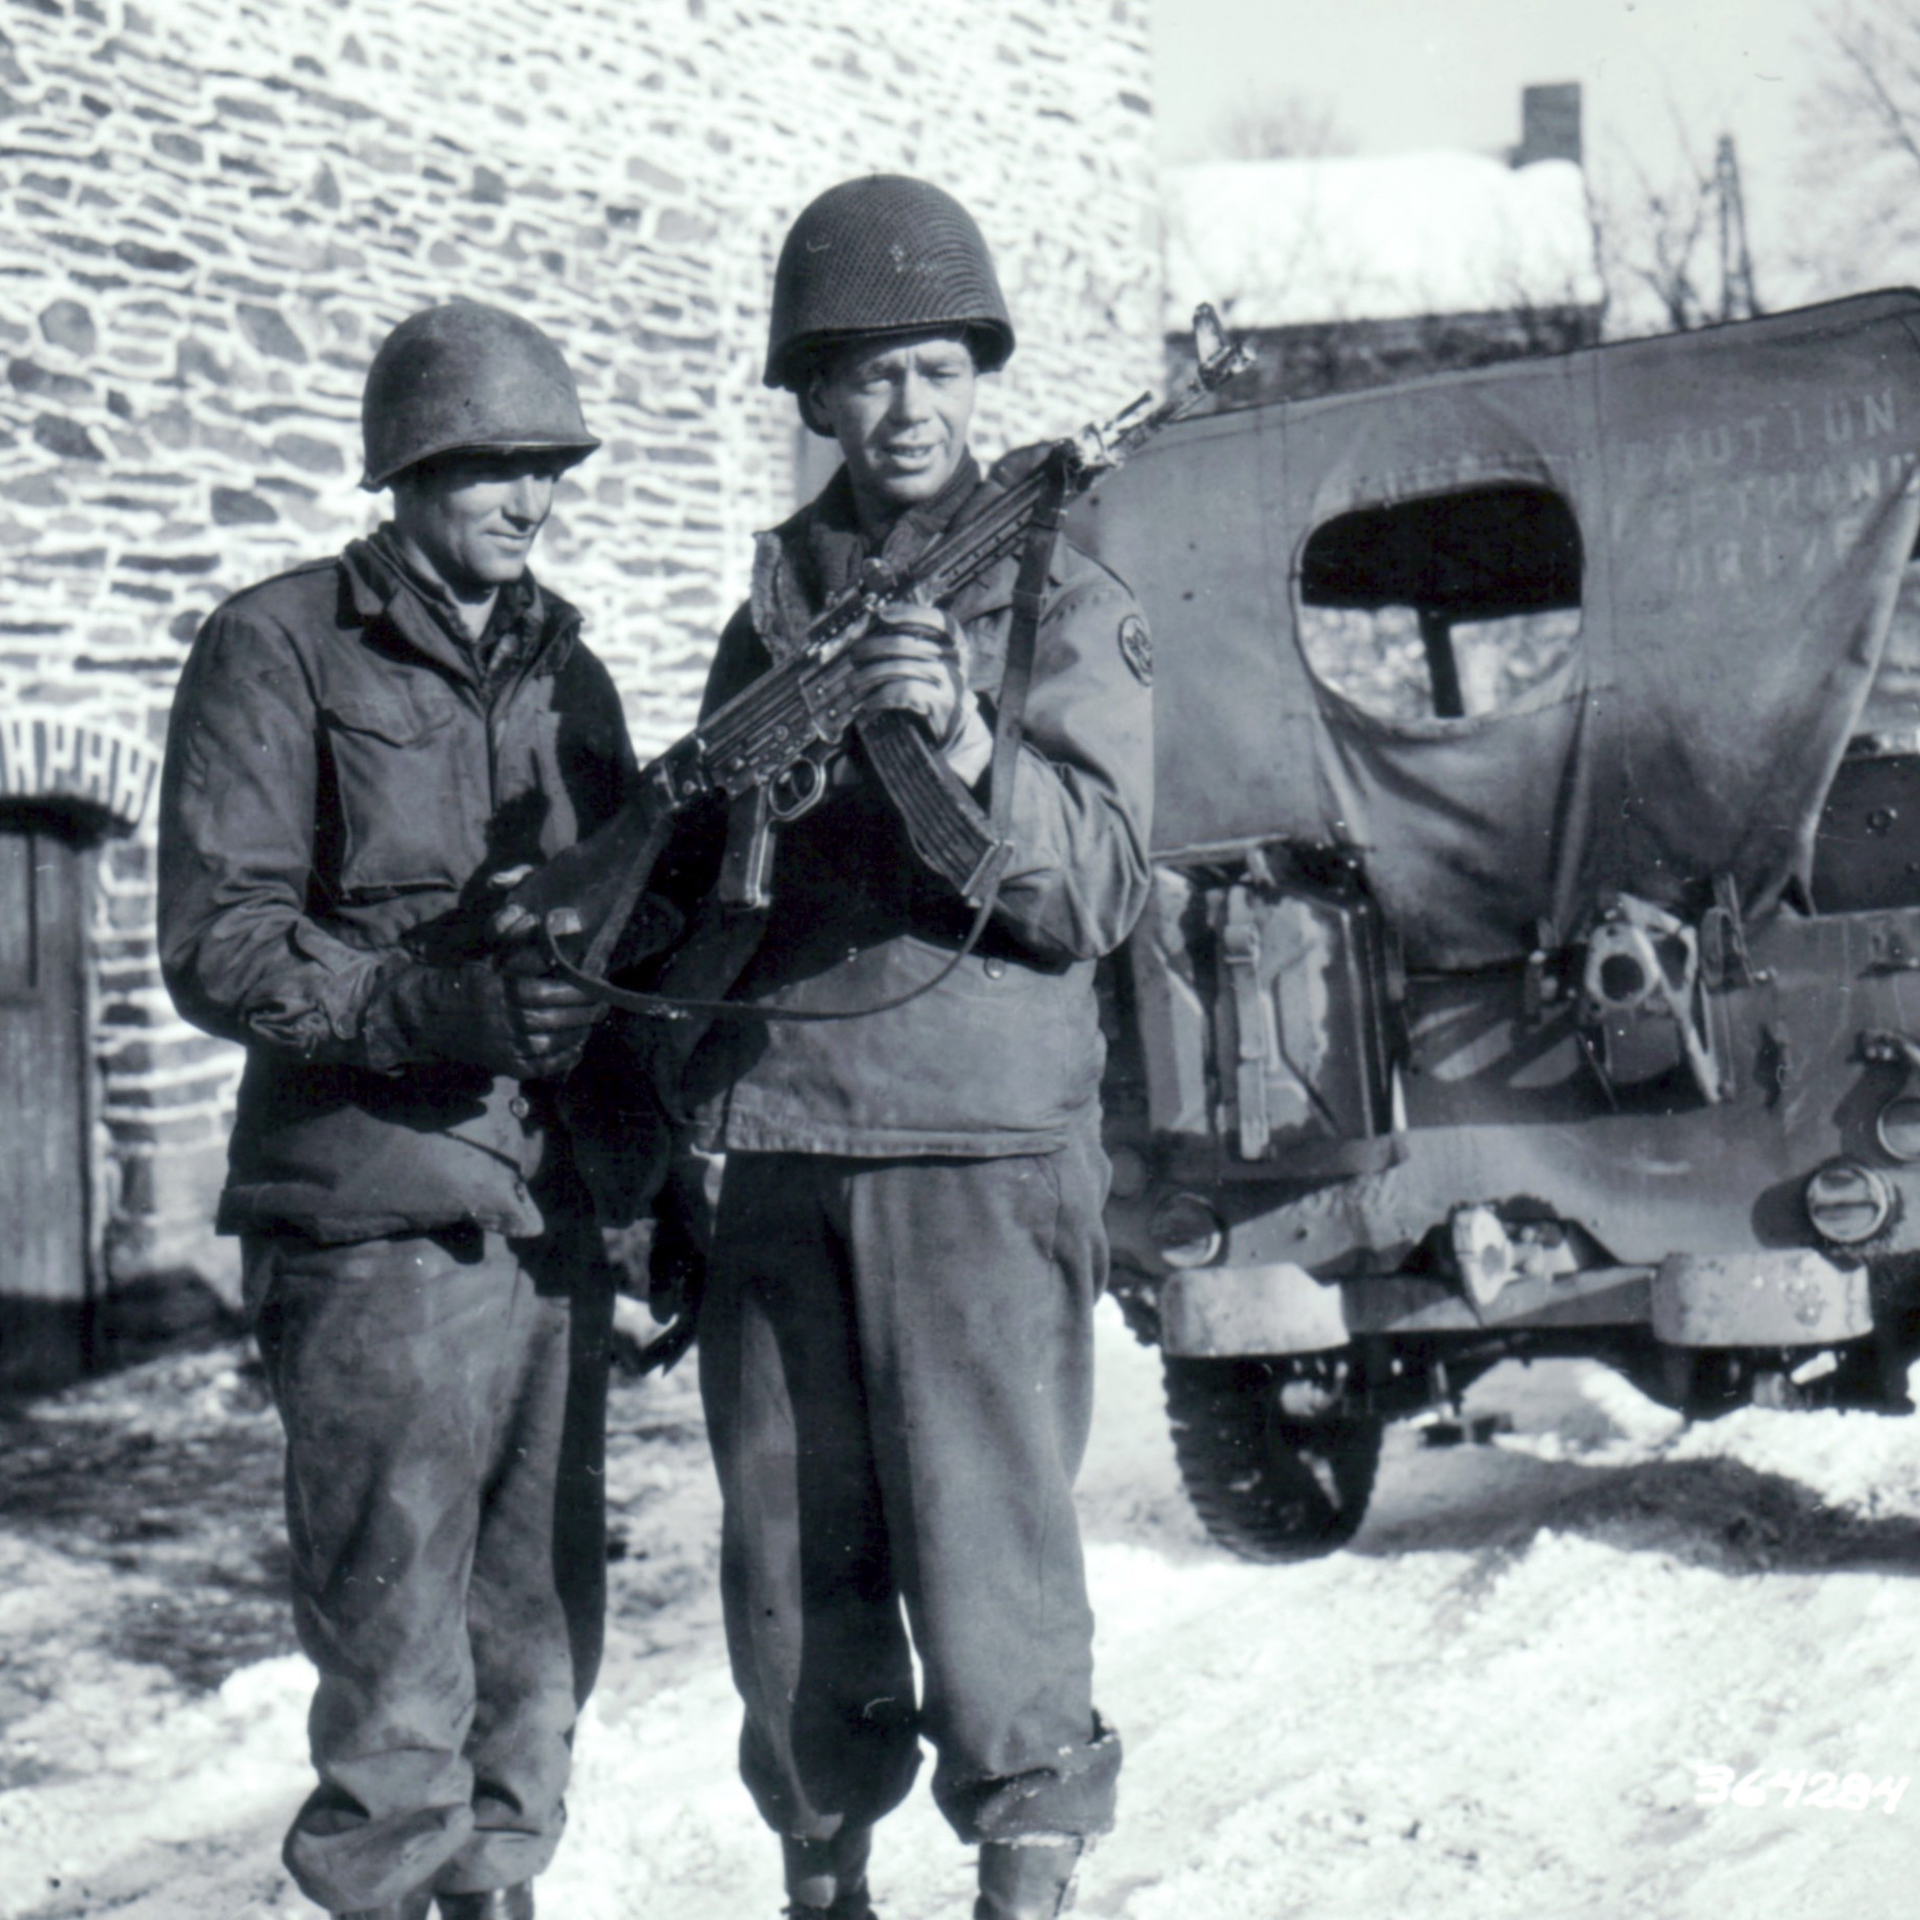 Men of the 101st Airborne inspect a captured StG44 at Monaville, Belgium during January 1945. Photo courtesy of National Archives & Records Administration (NARA).